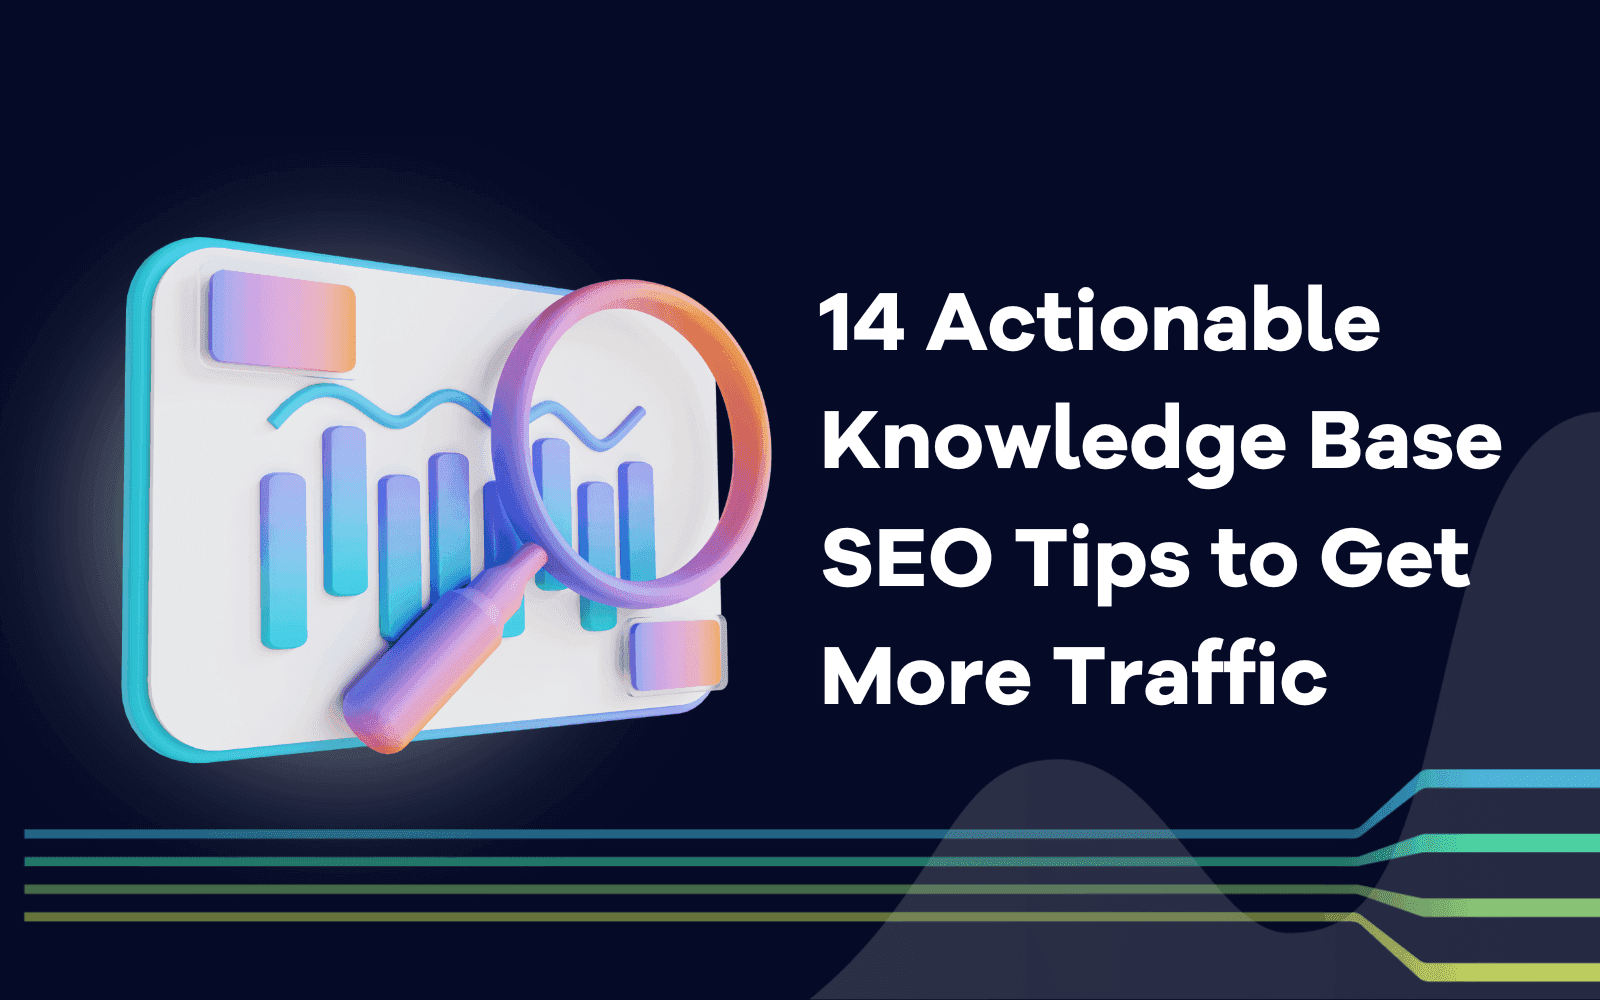 Actionable Knowledge Base SEO Tips to Get More Traffic